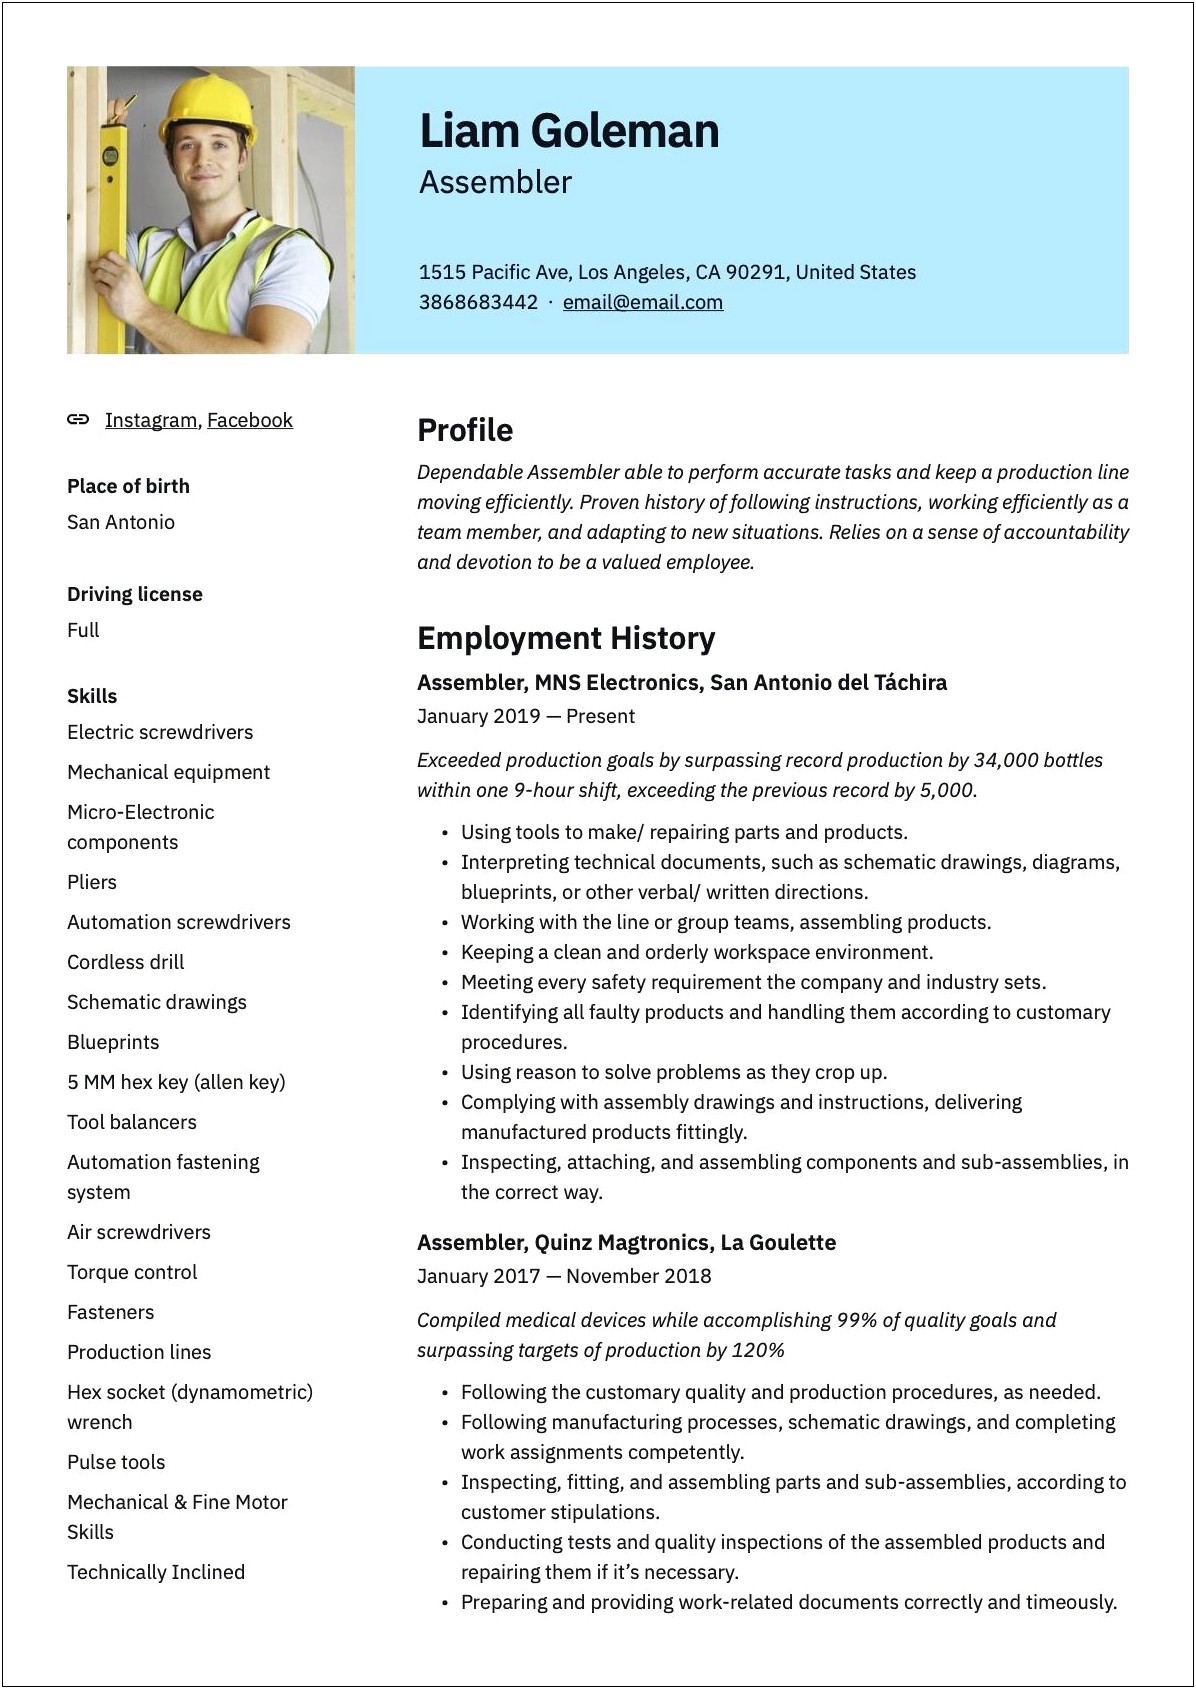 Resume Summary Examples For Assembly Worker